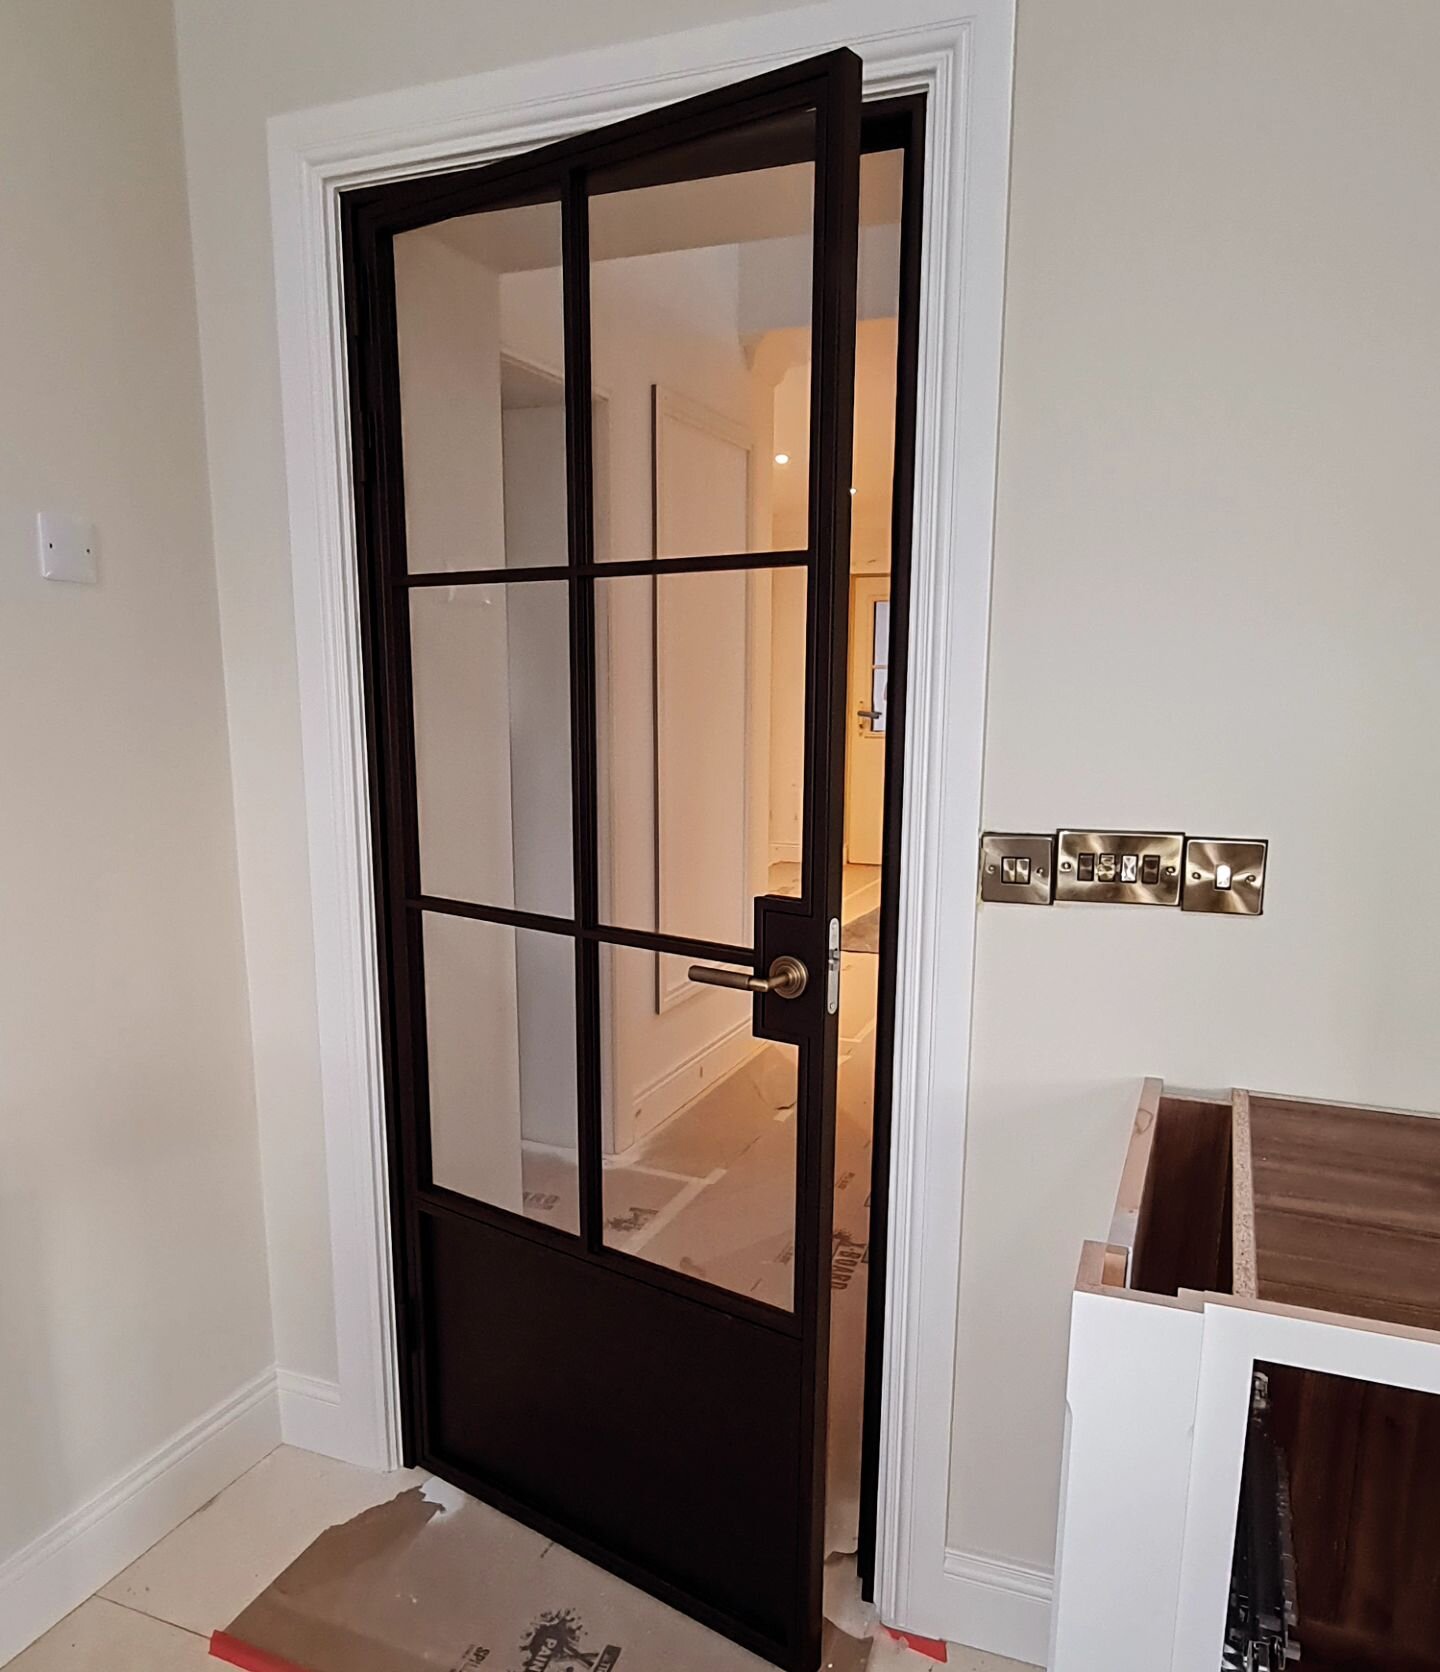 A timeless design - Recent install of two 6 panel doors with solid base plate. 

Small lock enclosure fitted with Piccadilly Antique Bronze knurled handles from the Burlington Range. 

We use a double profile system on all our builds so the door, win